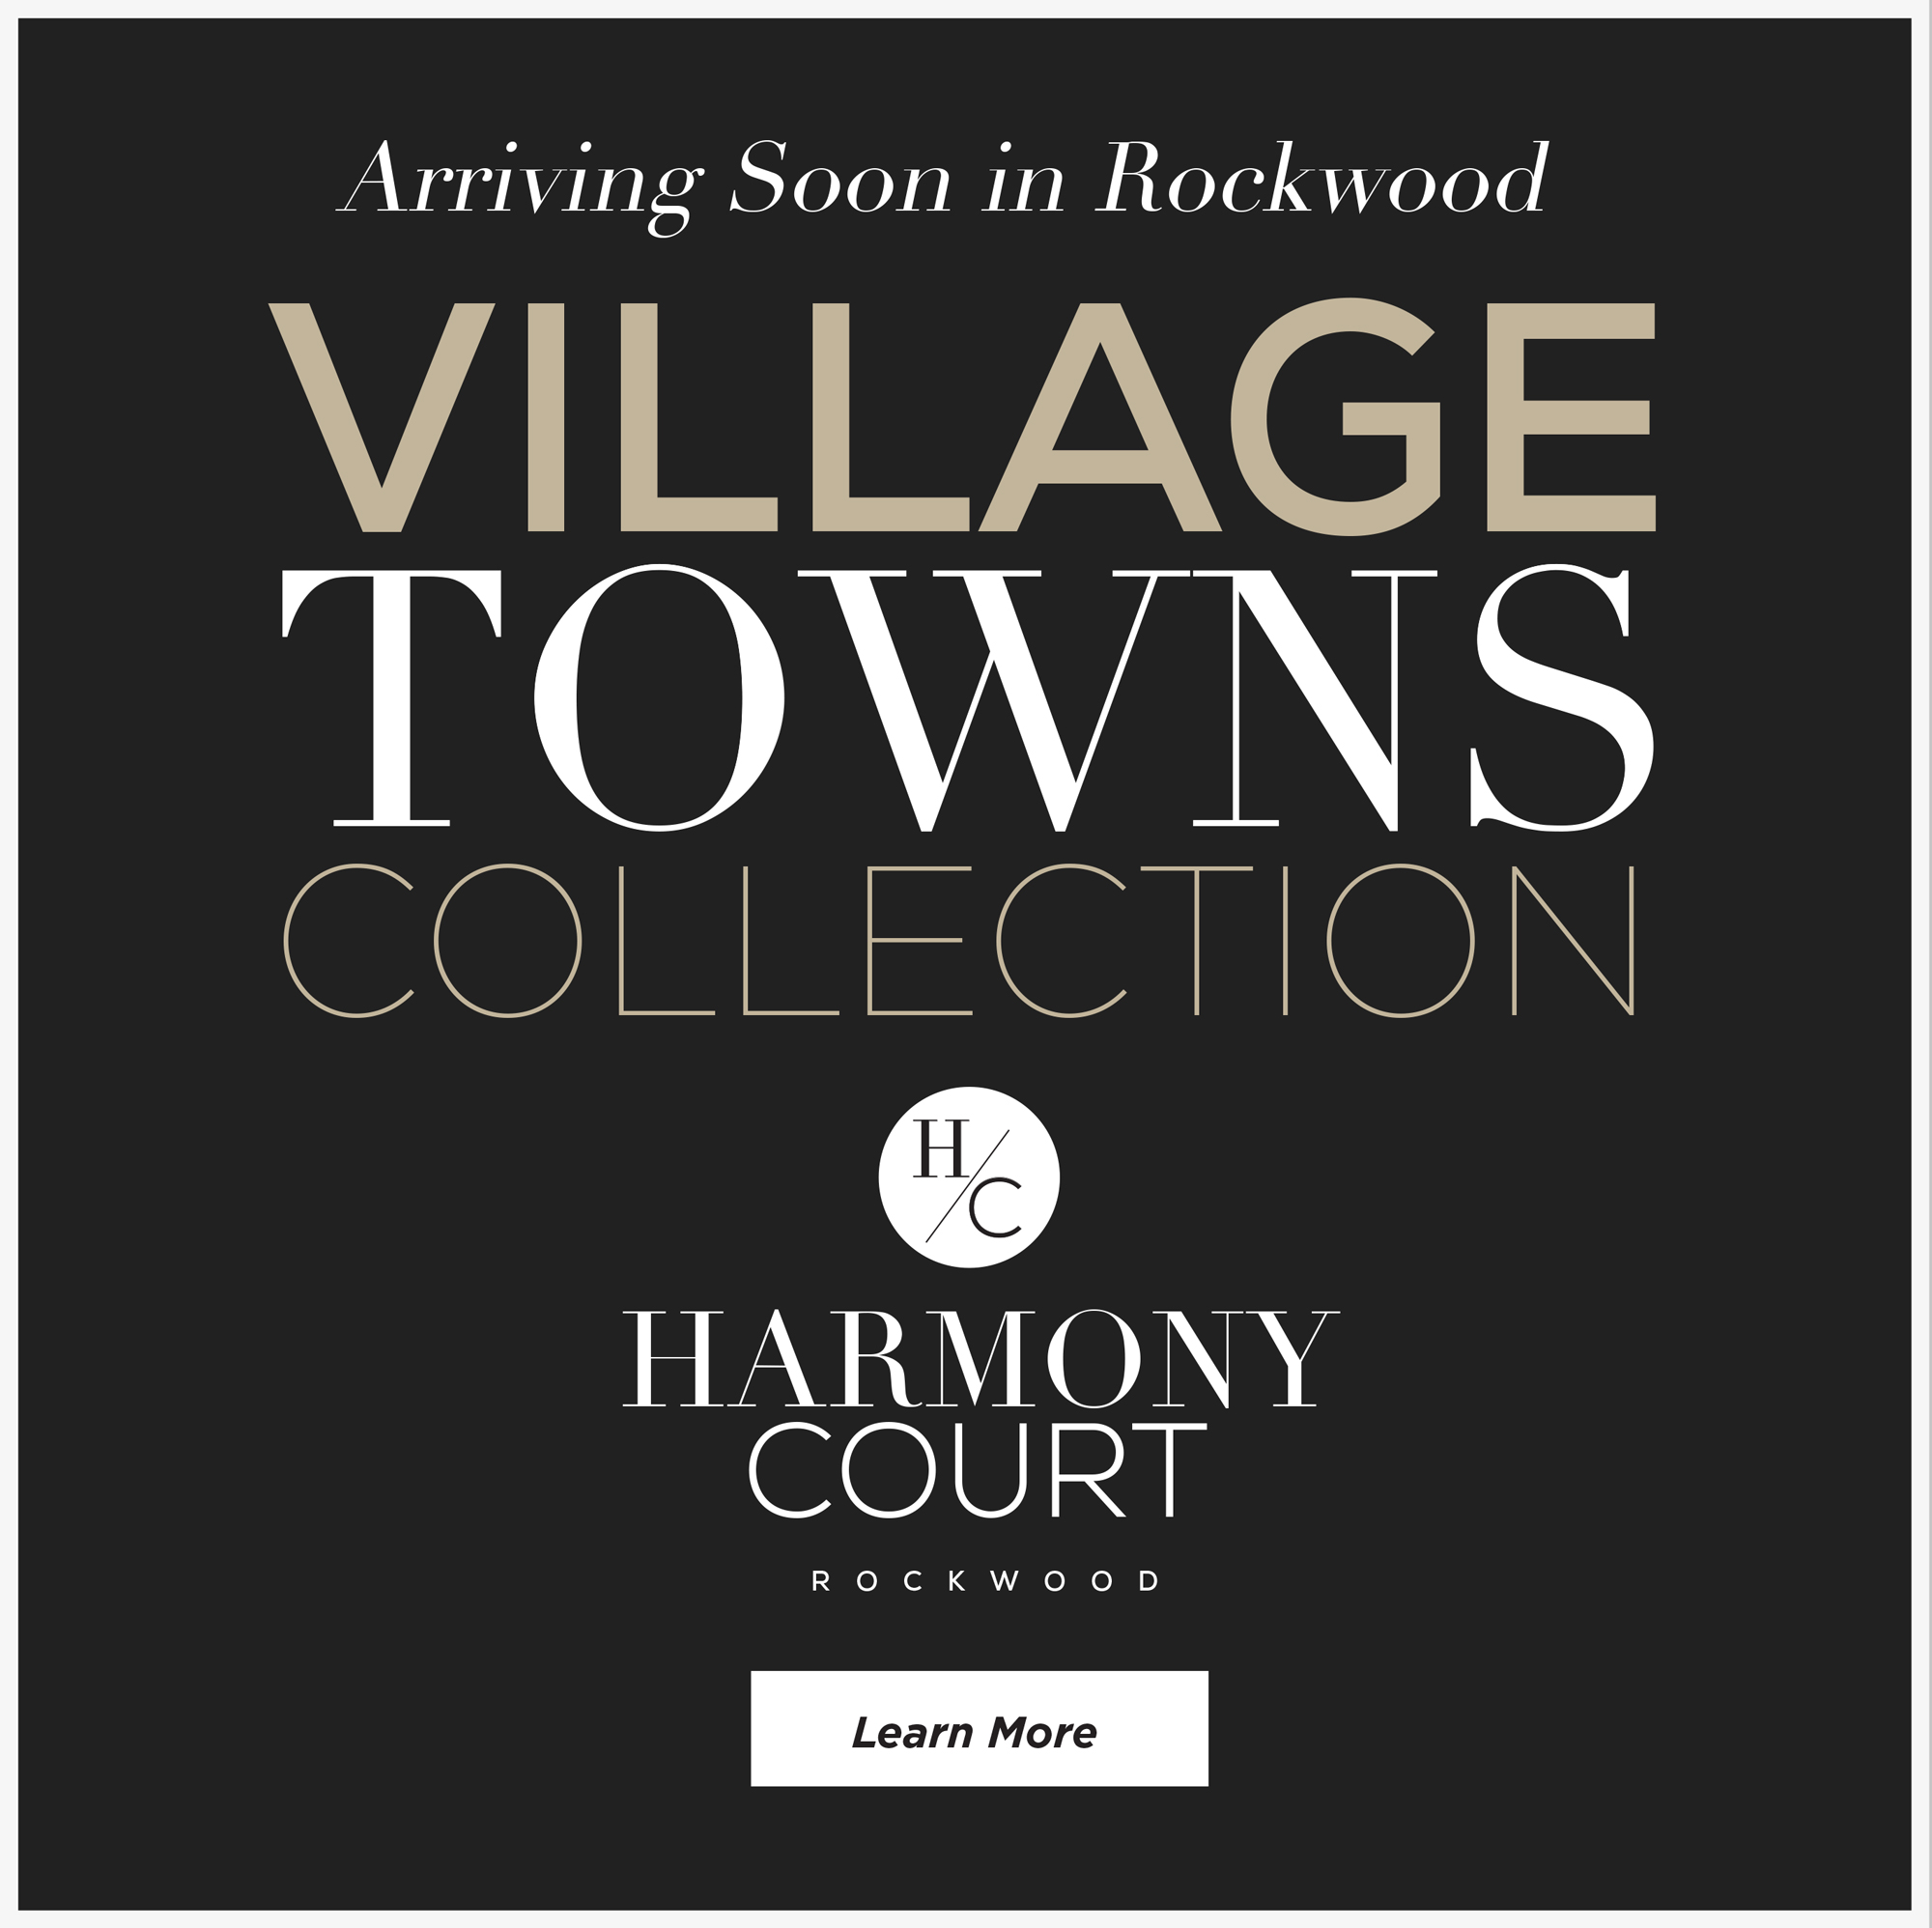 VILLAGE TOWNS COLLECTION